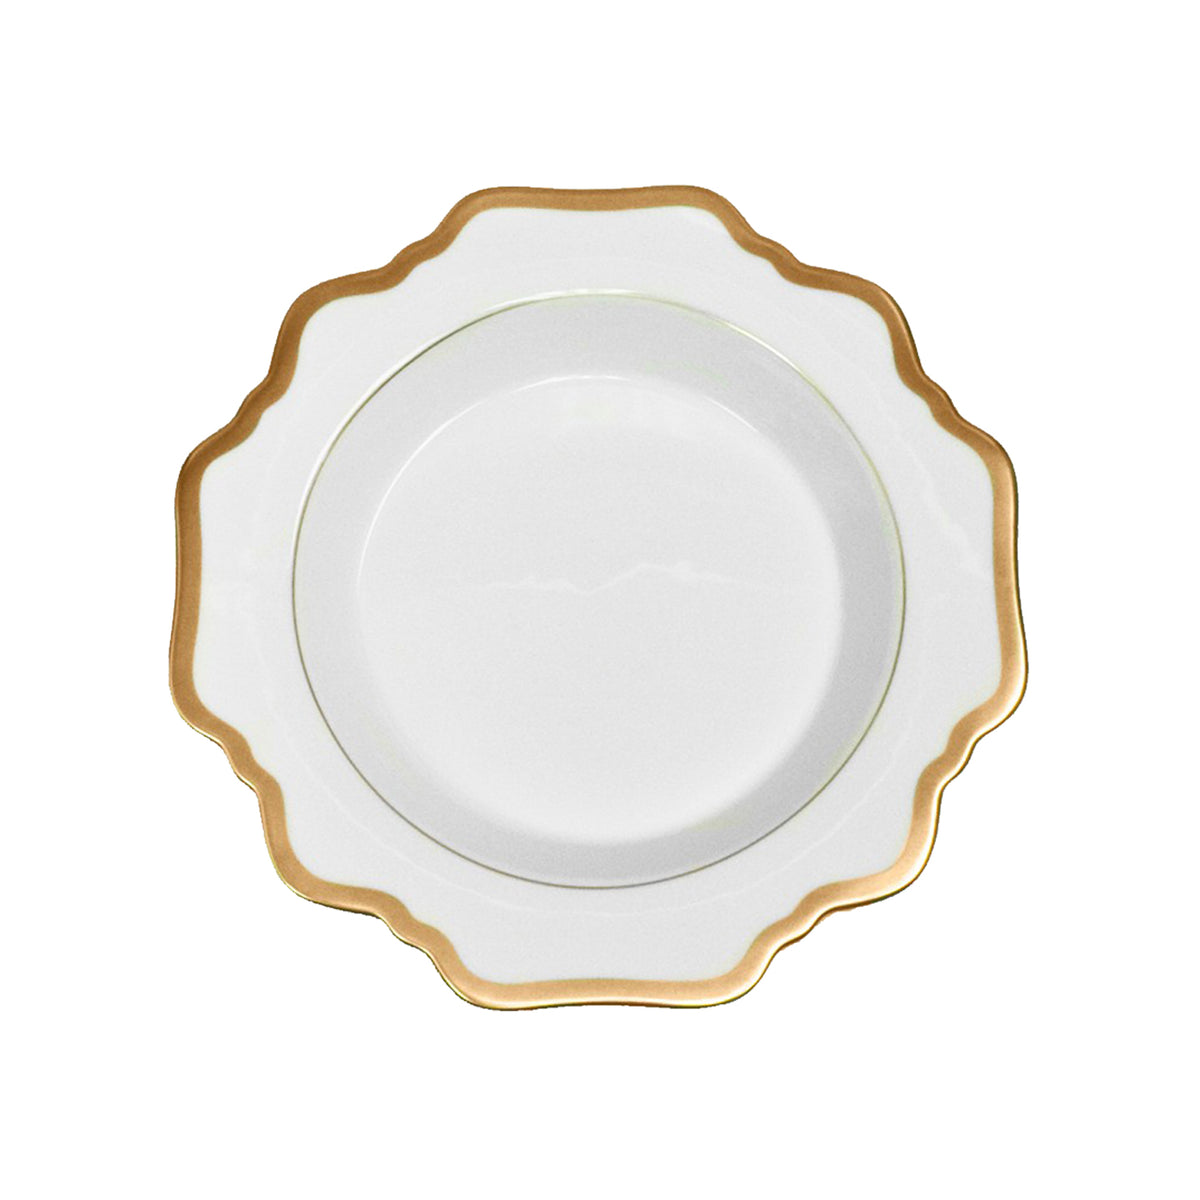 Antique White and Gold Rim Soup Plate